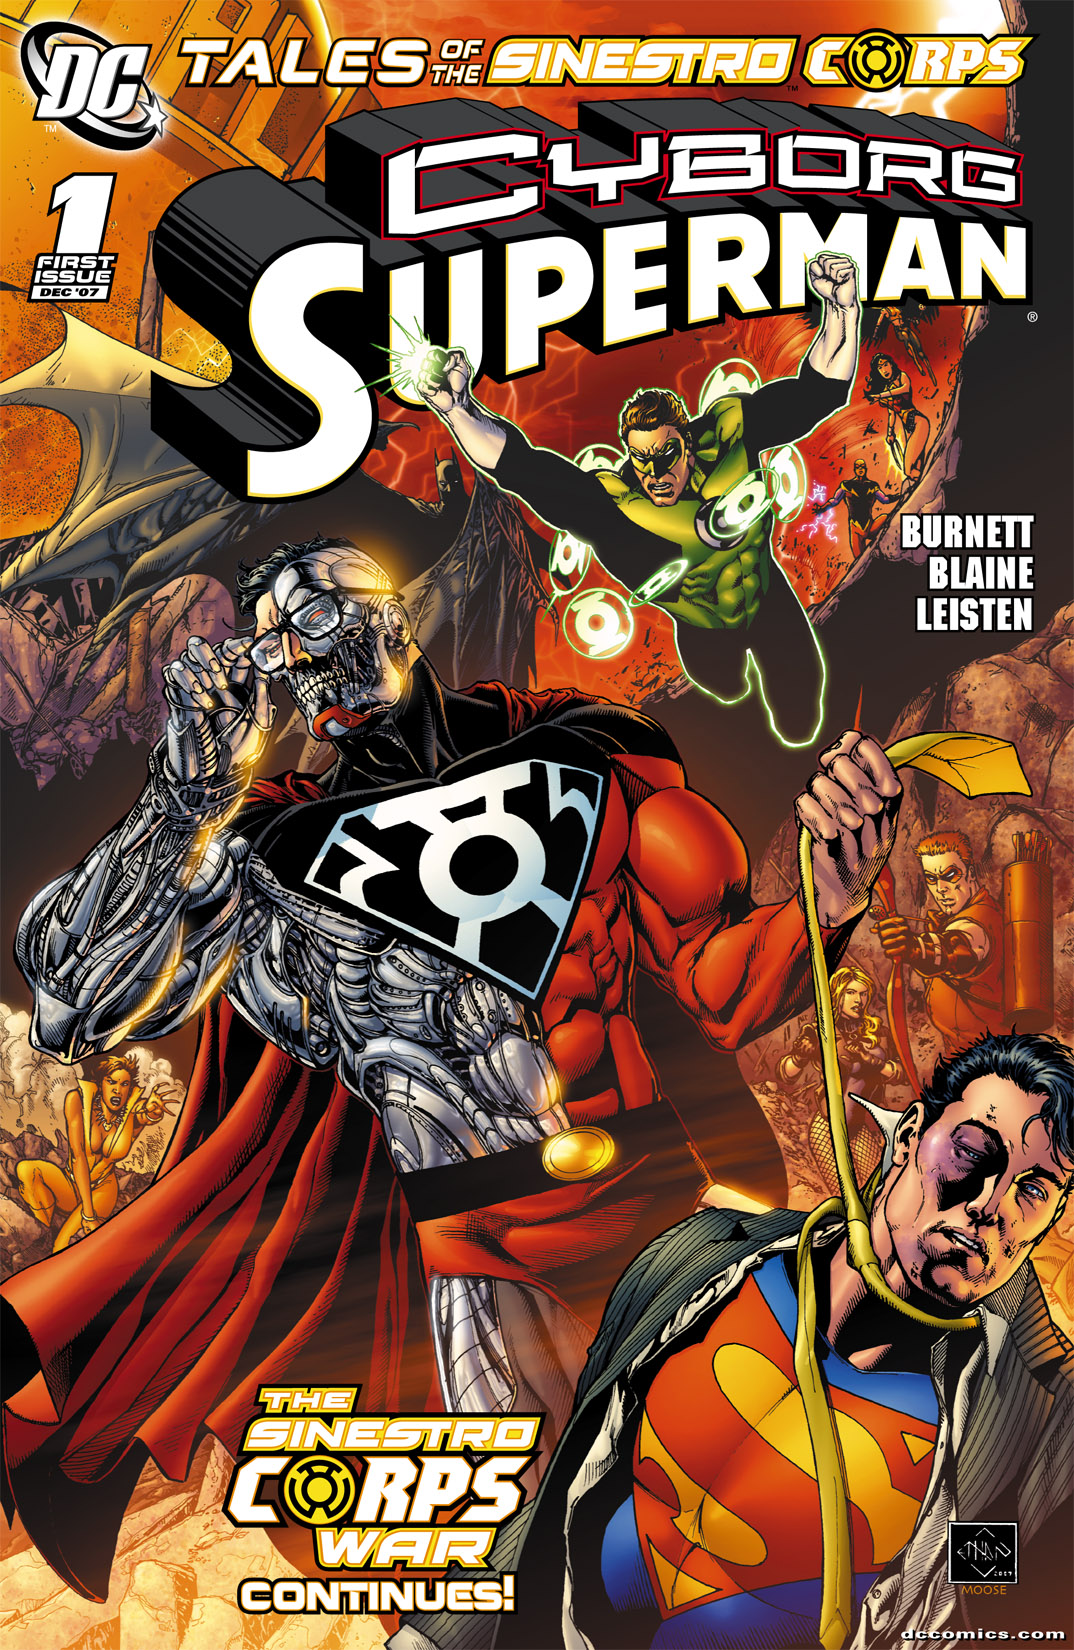 Read online Tales of the Sinestro Corps: Cyborg Superman comic -  Issue # Full - 1